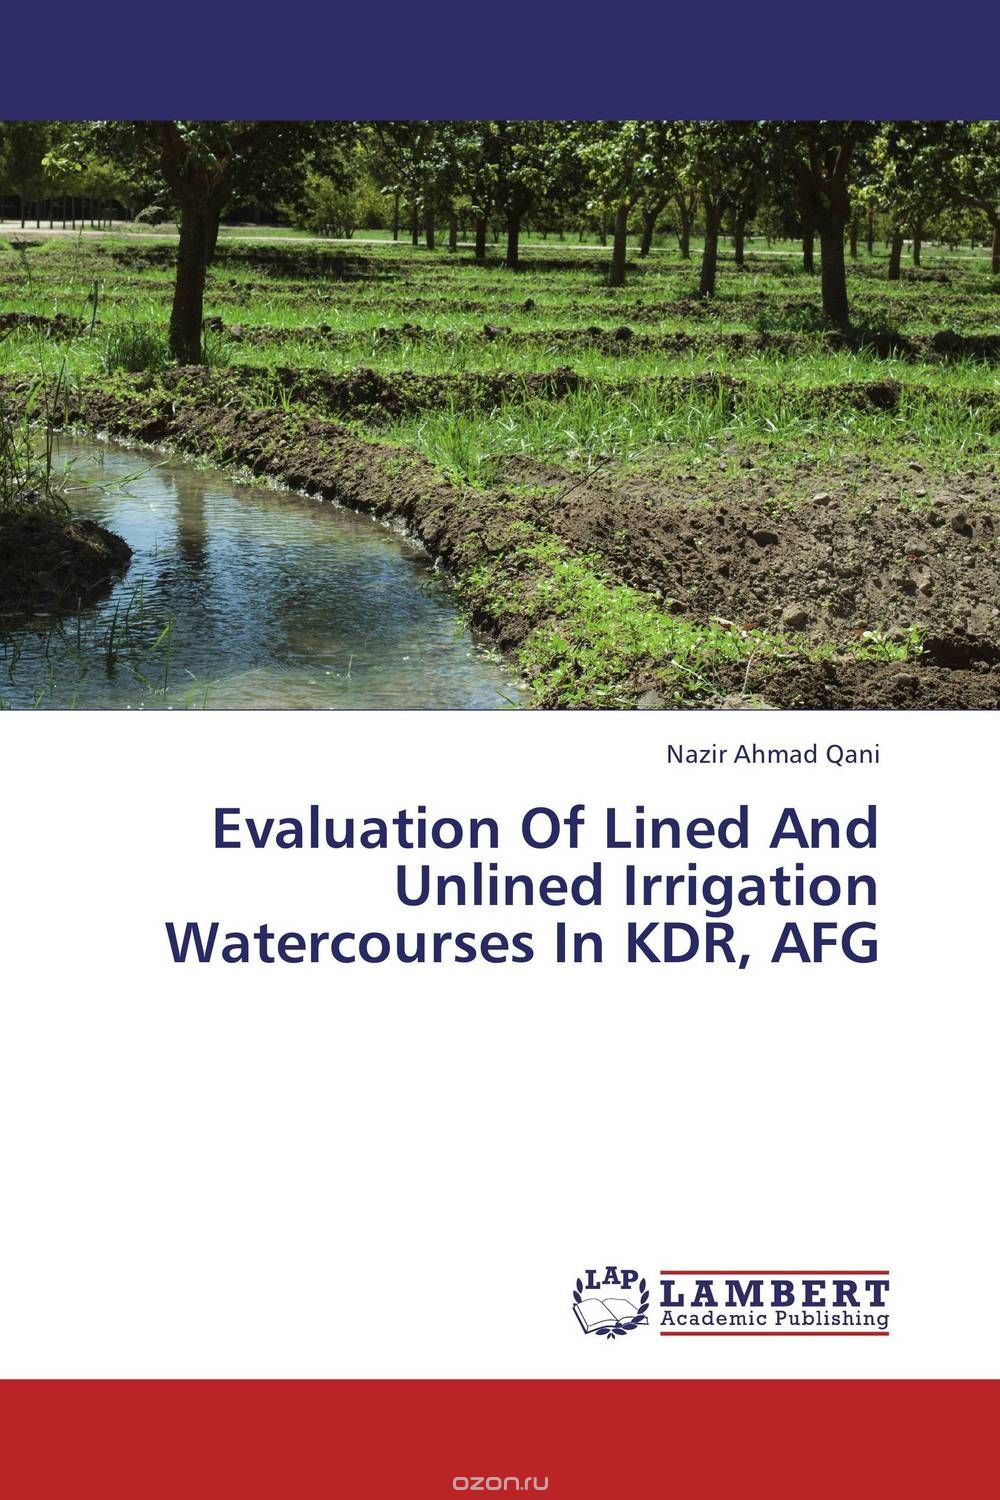 Скачать книгу "Evaluation Of Lined And Unlined Irrigation Watercourses In KDR, AFG"